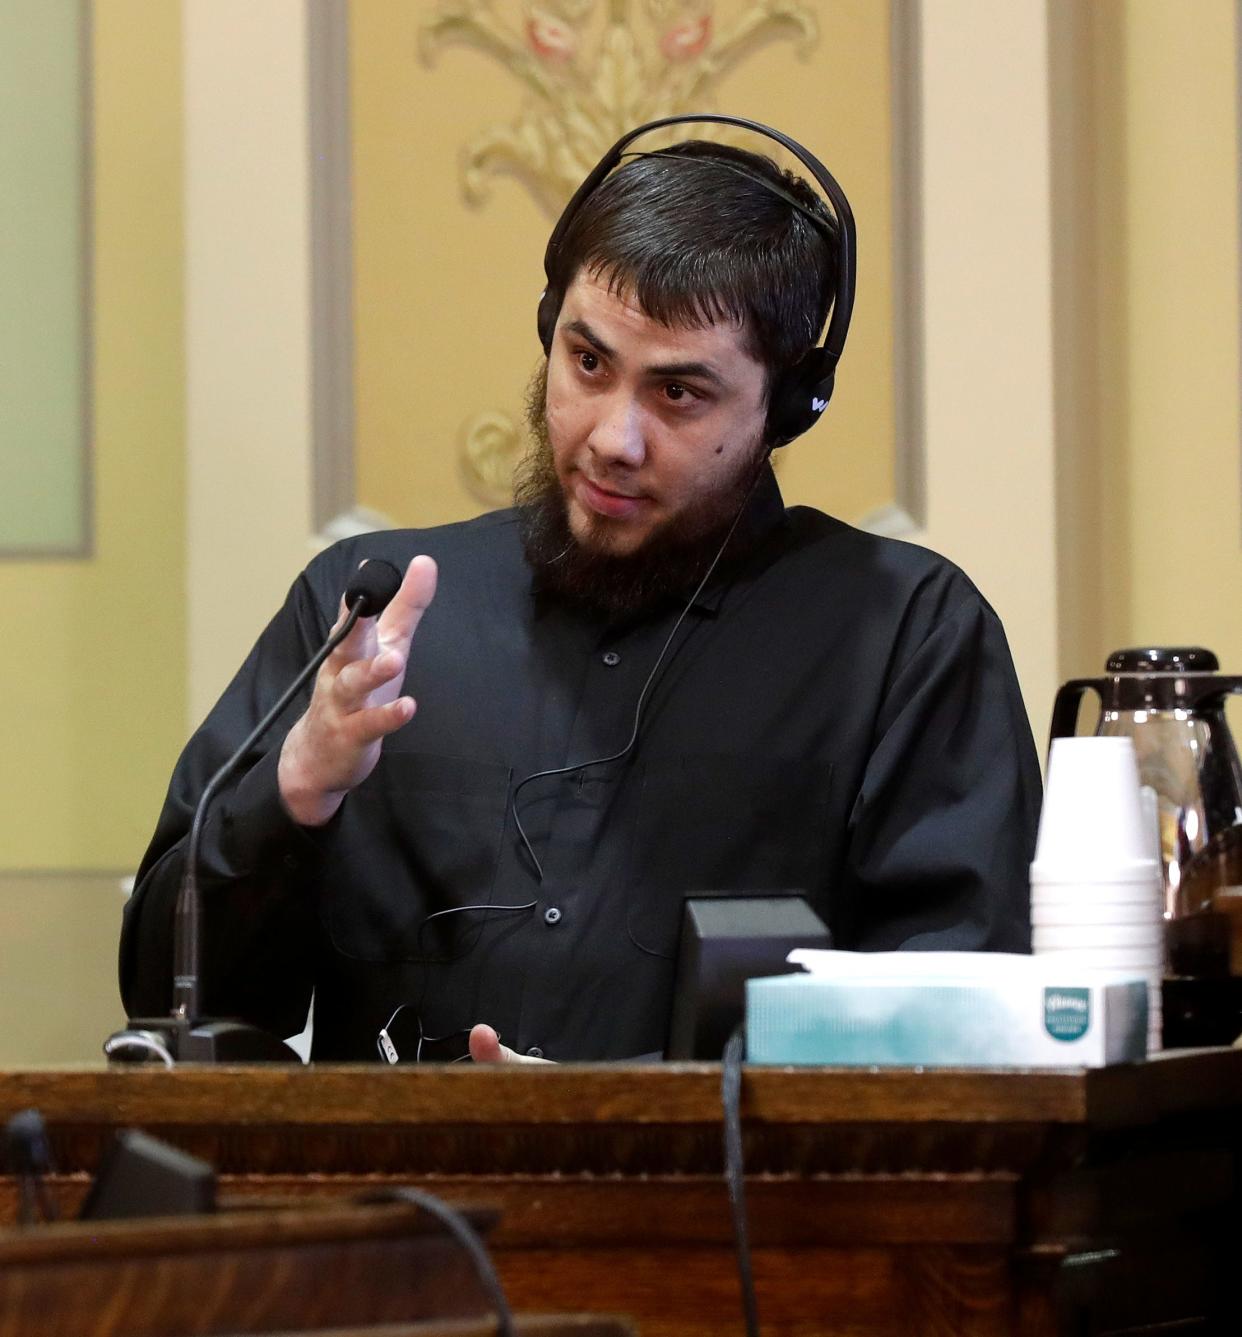 Jeisaac Rodriguez-Garcia testifies on Feb. 28 during a jury trial for Pedro Santiago-Marquez, who was convicted of first-degree intentional homicide and mutilating a corpse, both as party to a crime, in Green Bay. Rodriguez-Garcia was convicted of mutilating a corpse in connection to the incident.